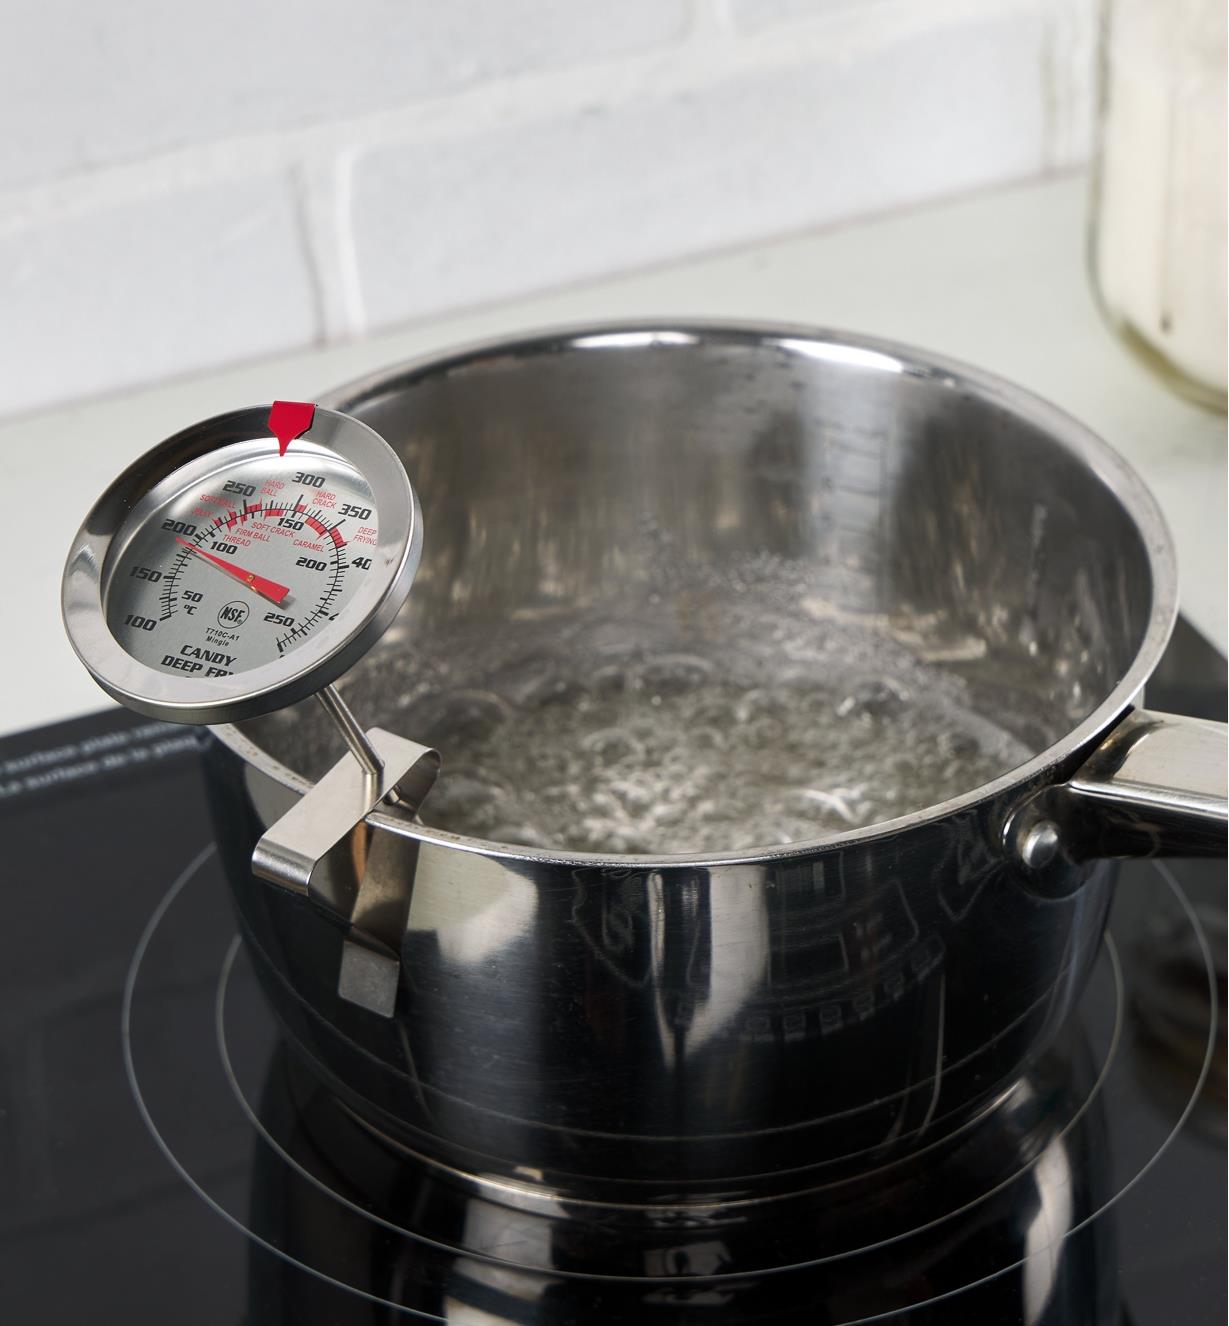 A thermometer clipped to the edge of a pot on a stove